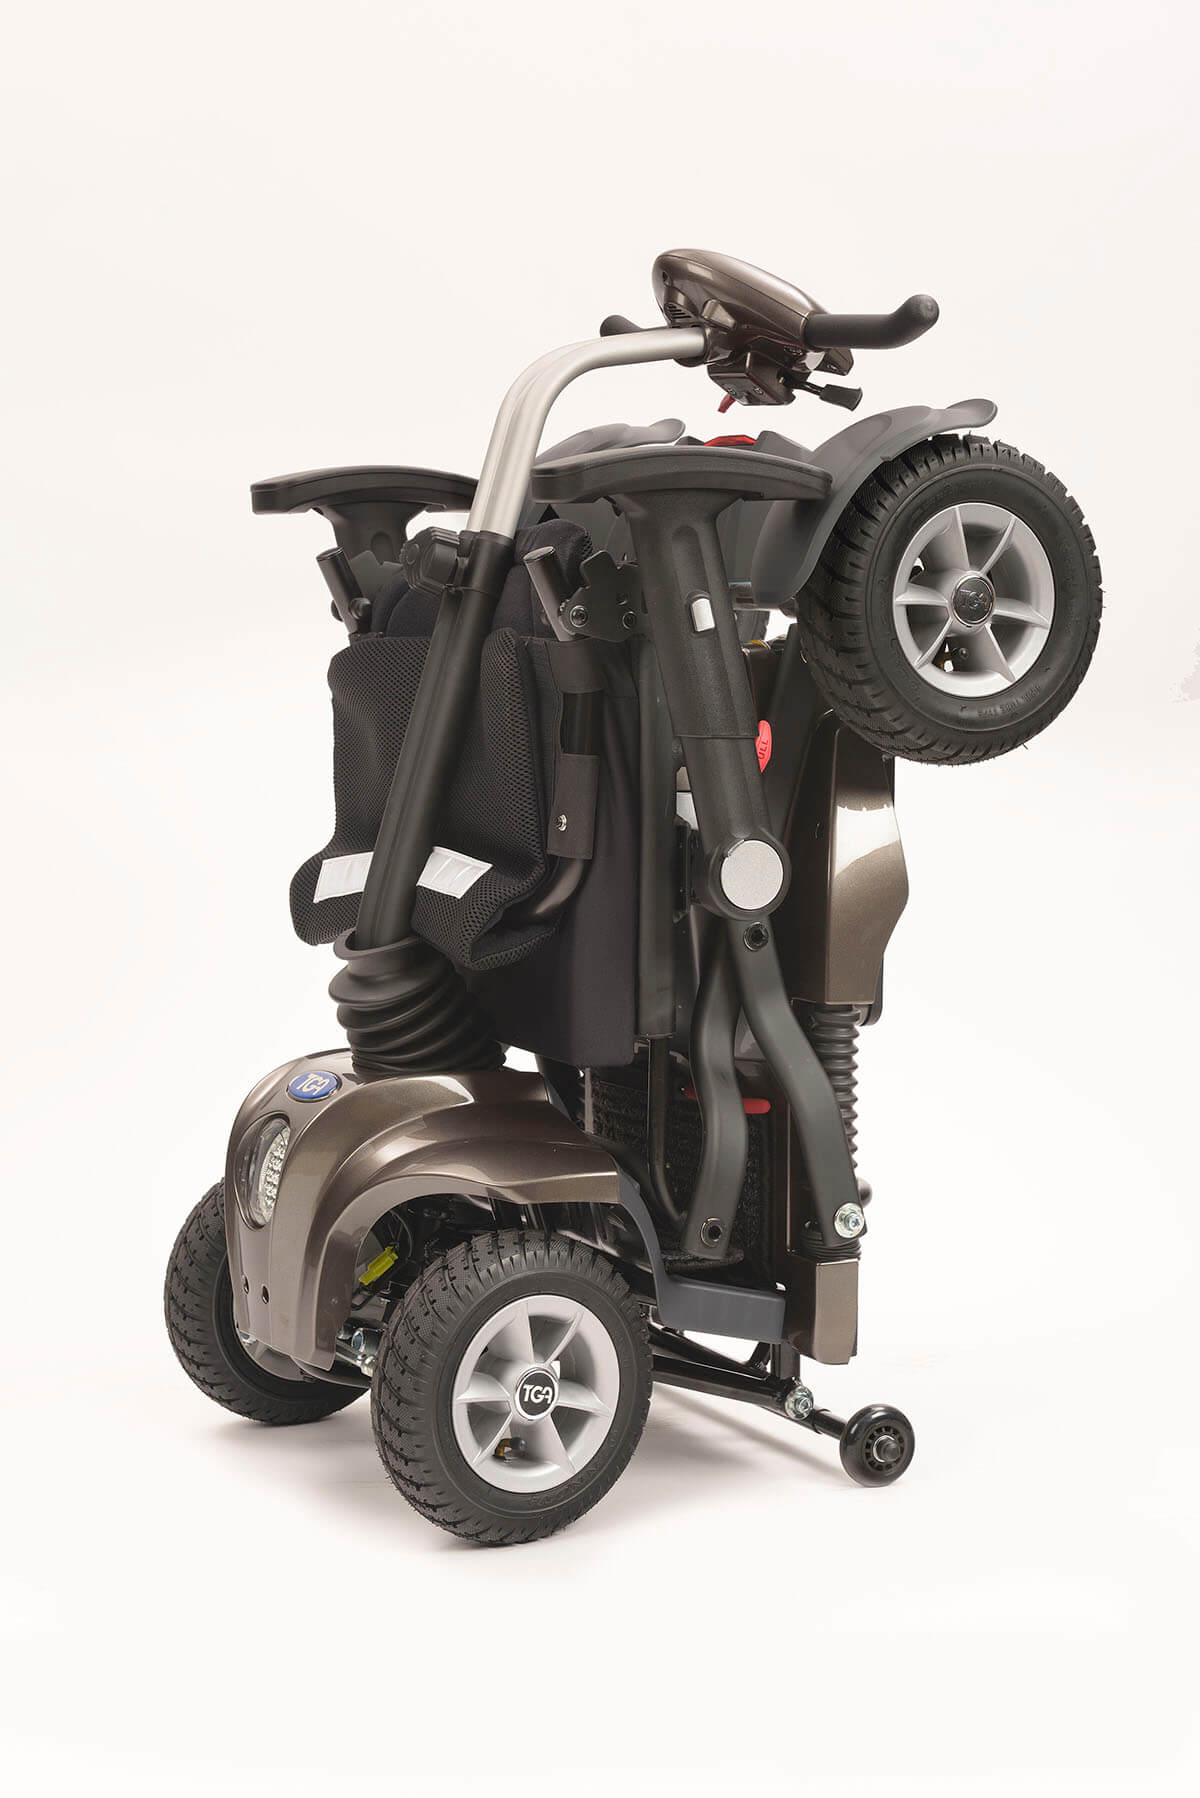 Maximo scooter